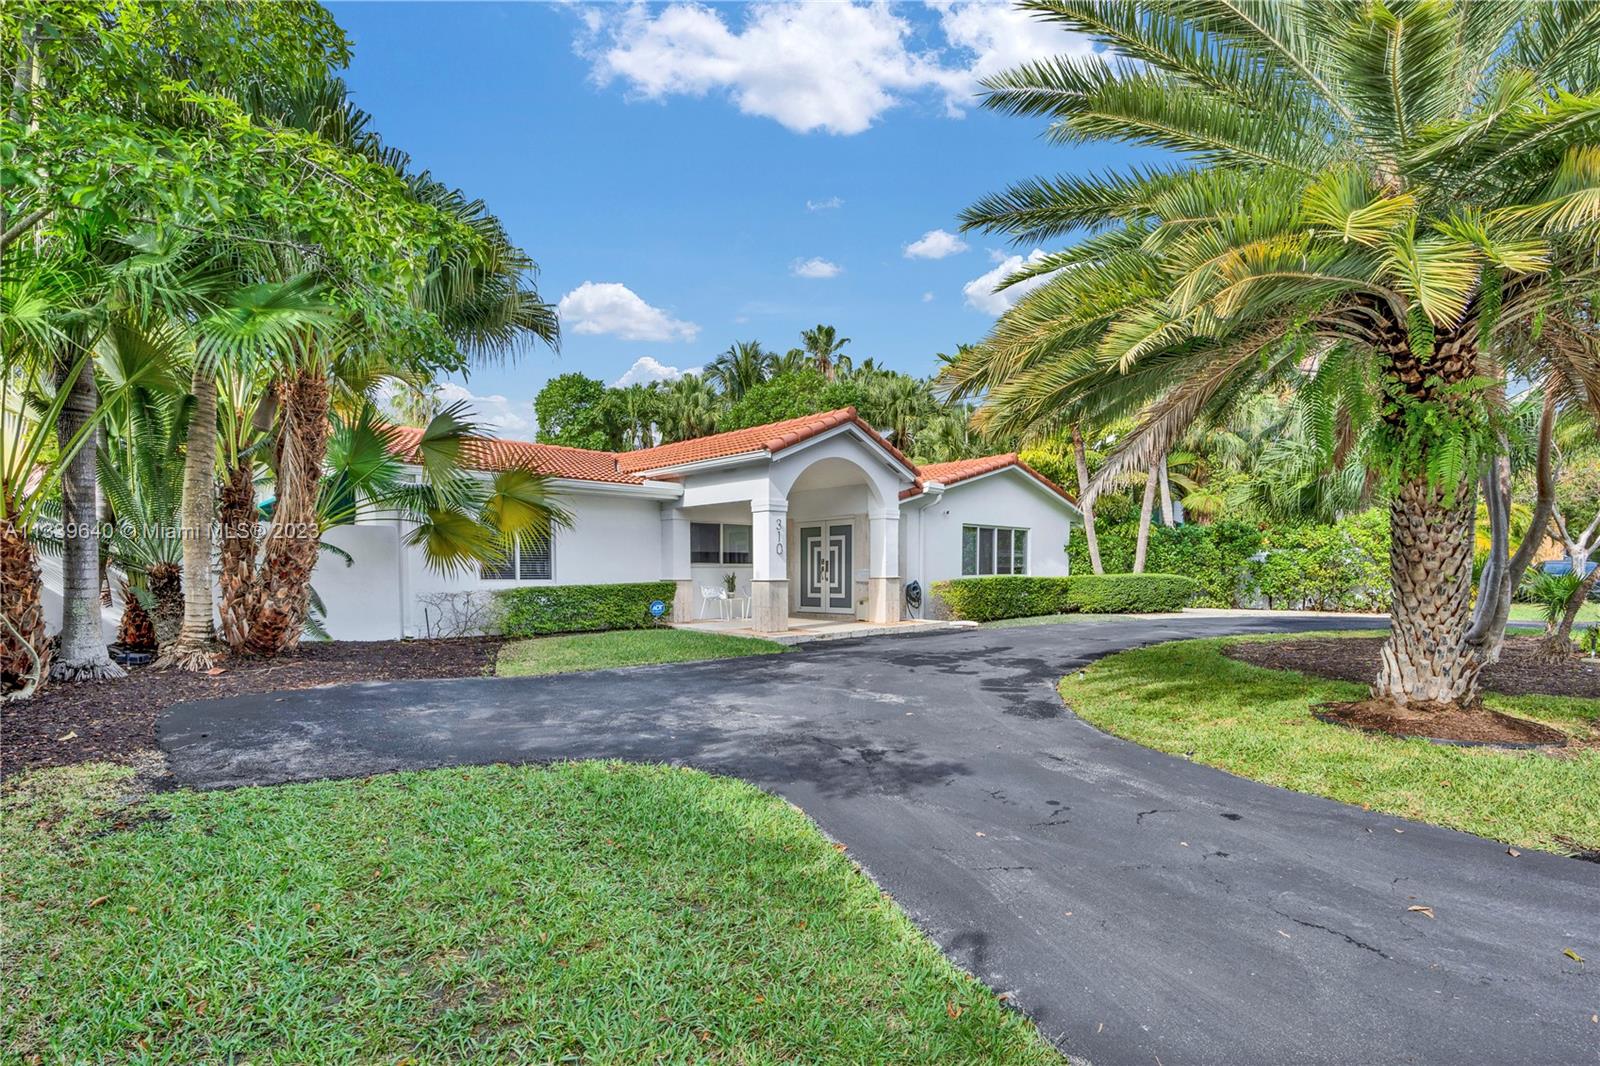 Beautiful curb appeal and oversize lot in one of the premier location on the exclusive island of Key Biscayne